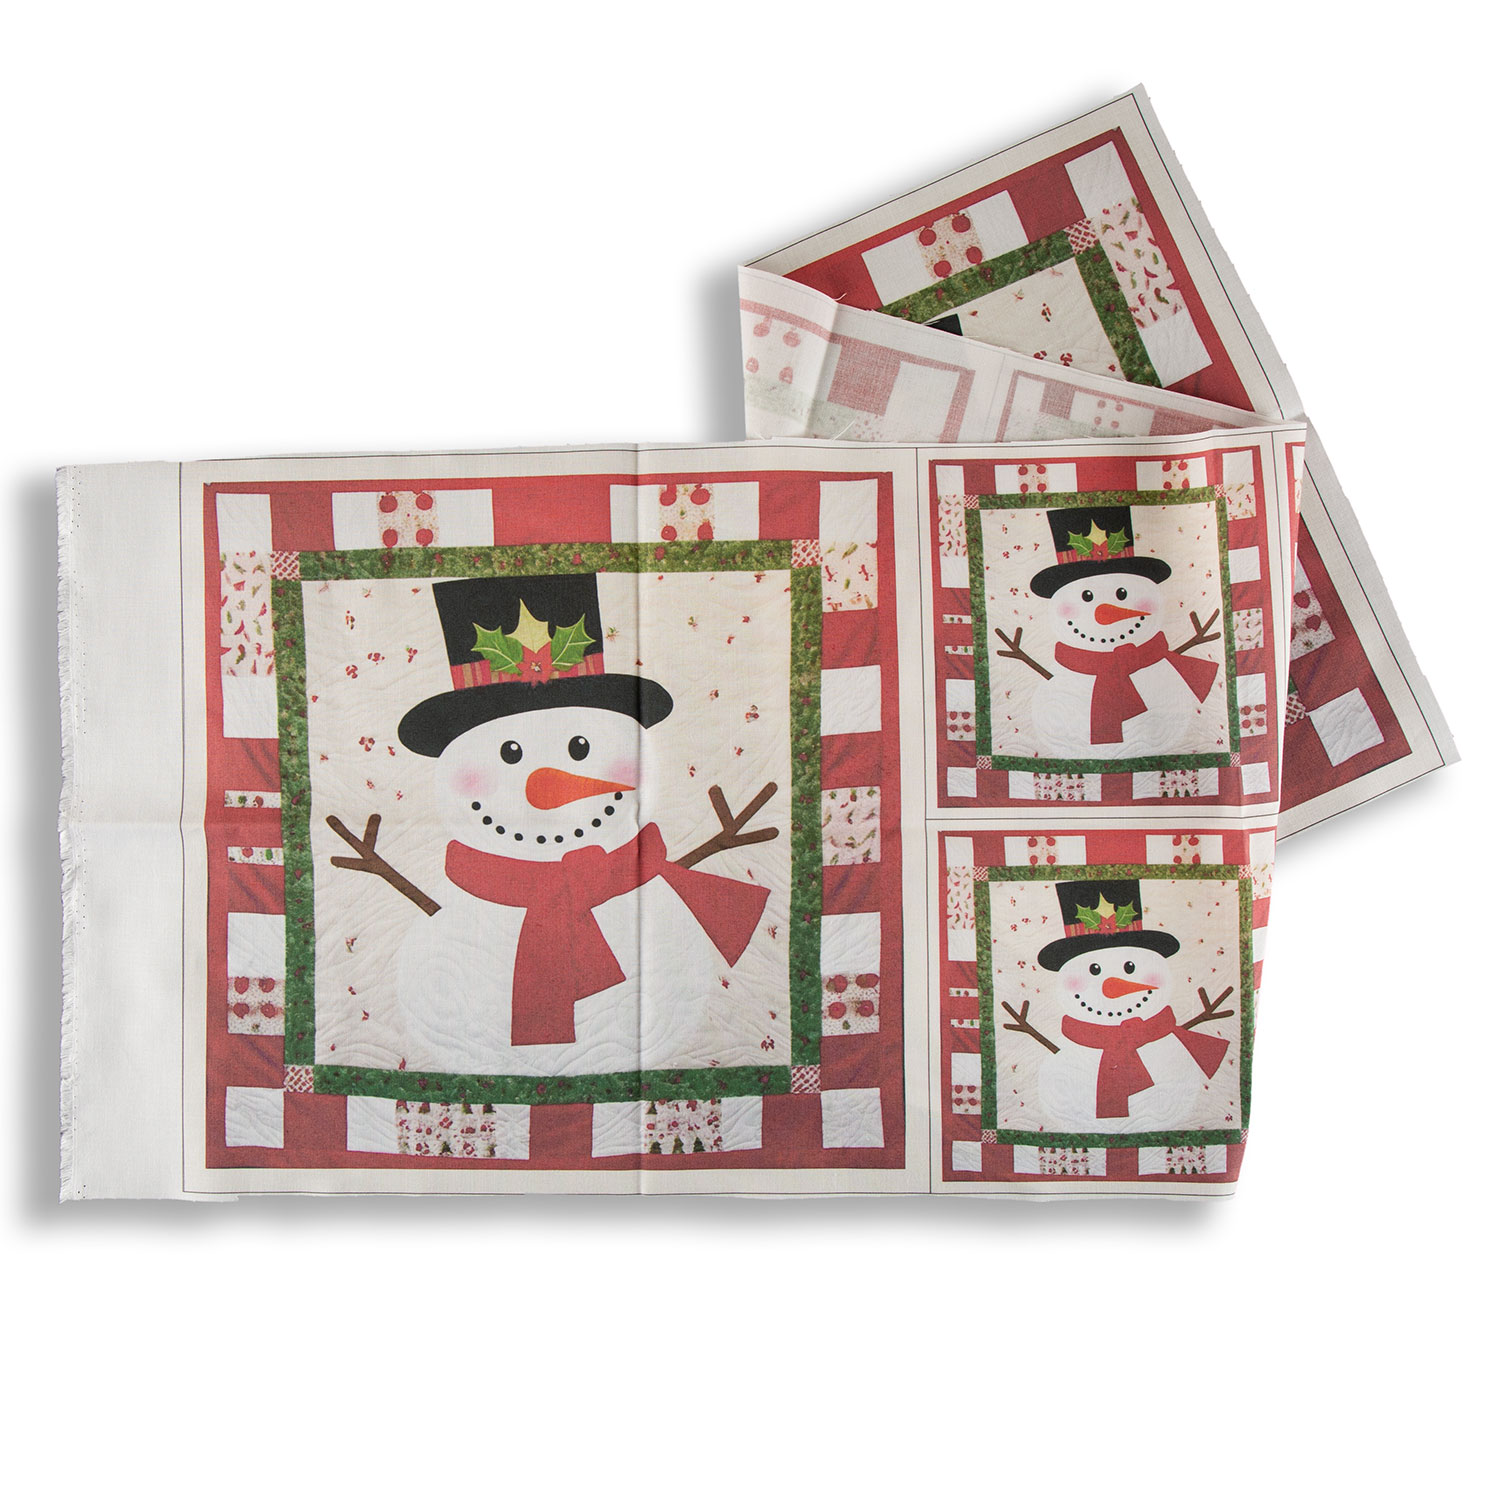 Craft Yourself Silly Festive Bag & Cushion Panels - 2 x 13.5" Panels & 4x 6" Panels - Pick N Mix - Choose Any 2 - Patchwork Snowman